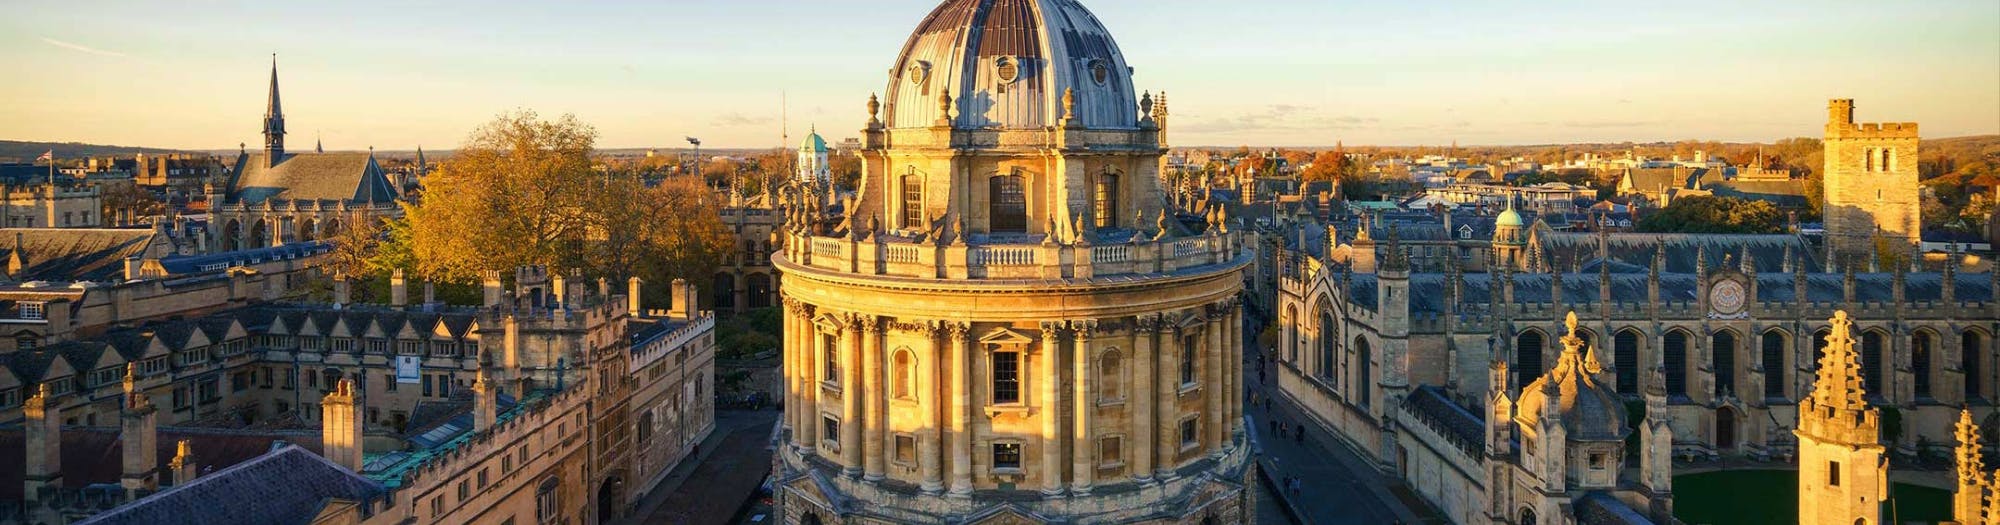 Oxford and Cambridge guided tour from London